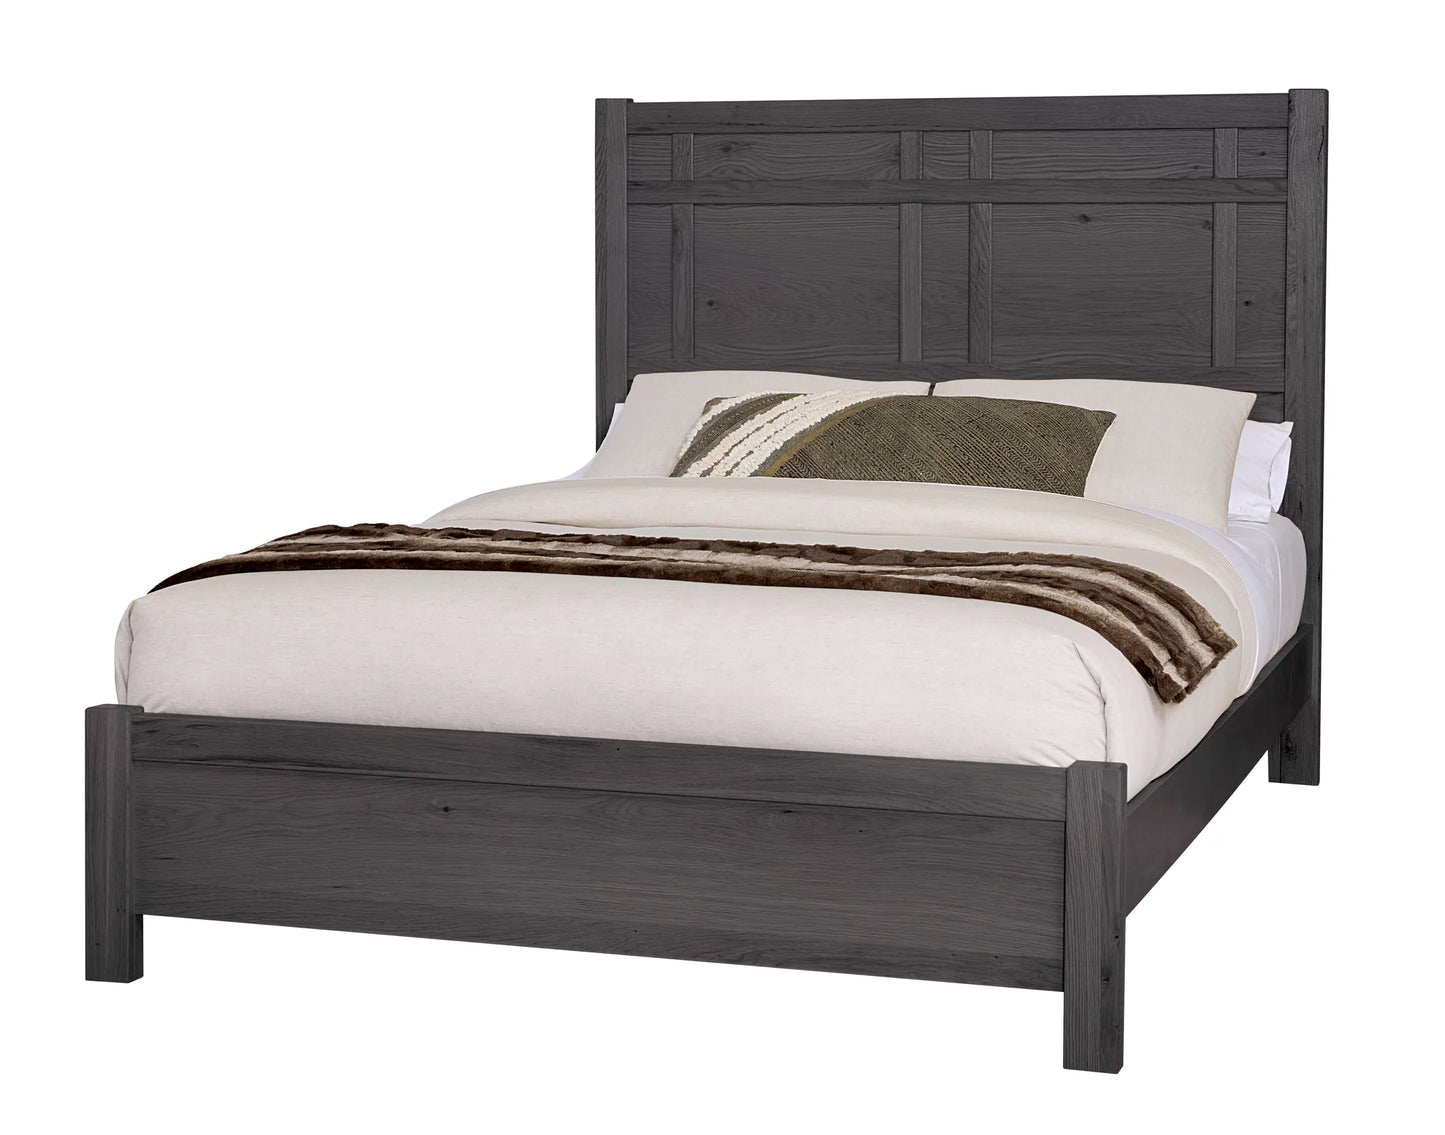 Custom Express - Queen Architectural Bed - Graphite